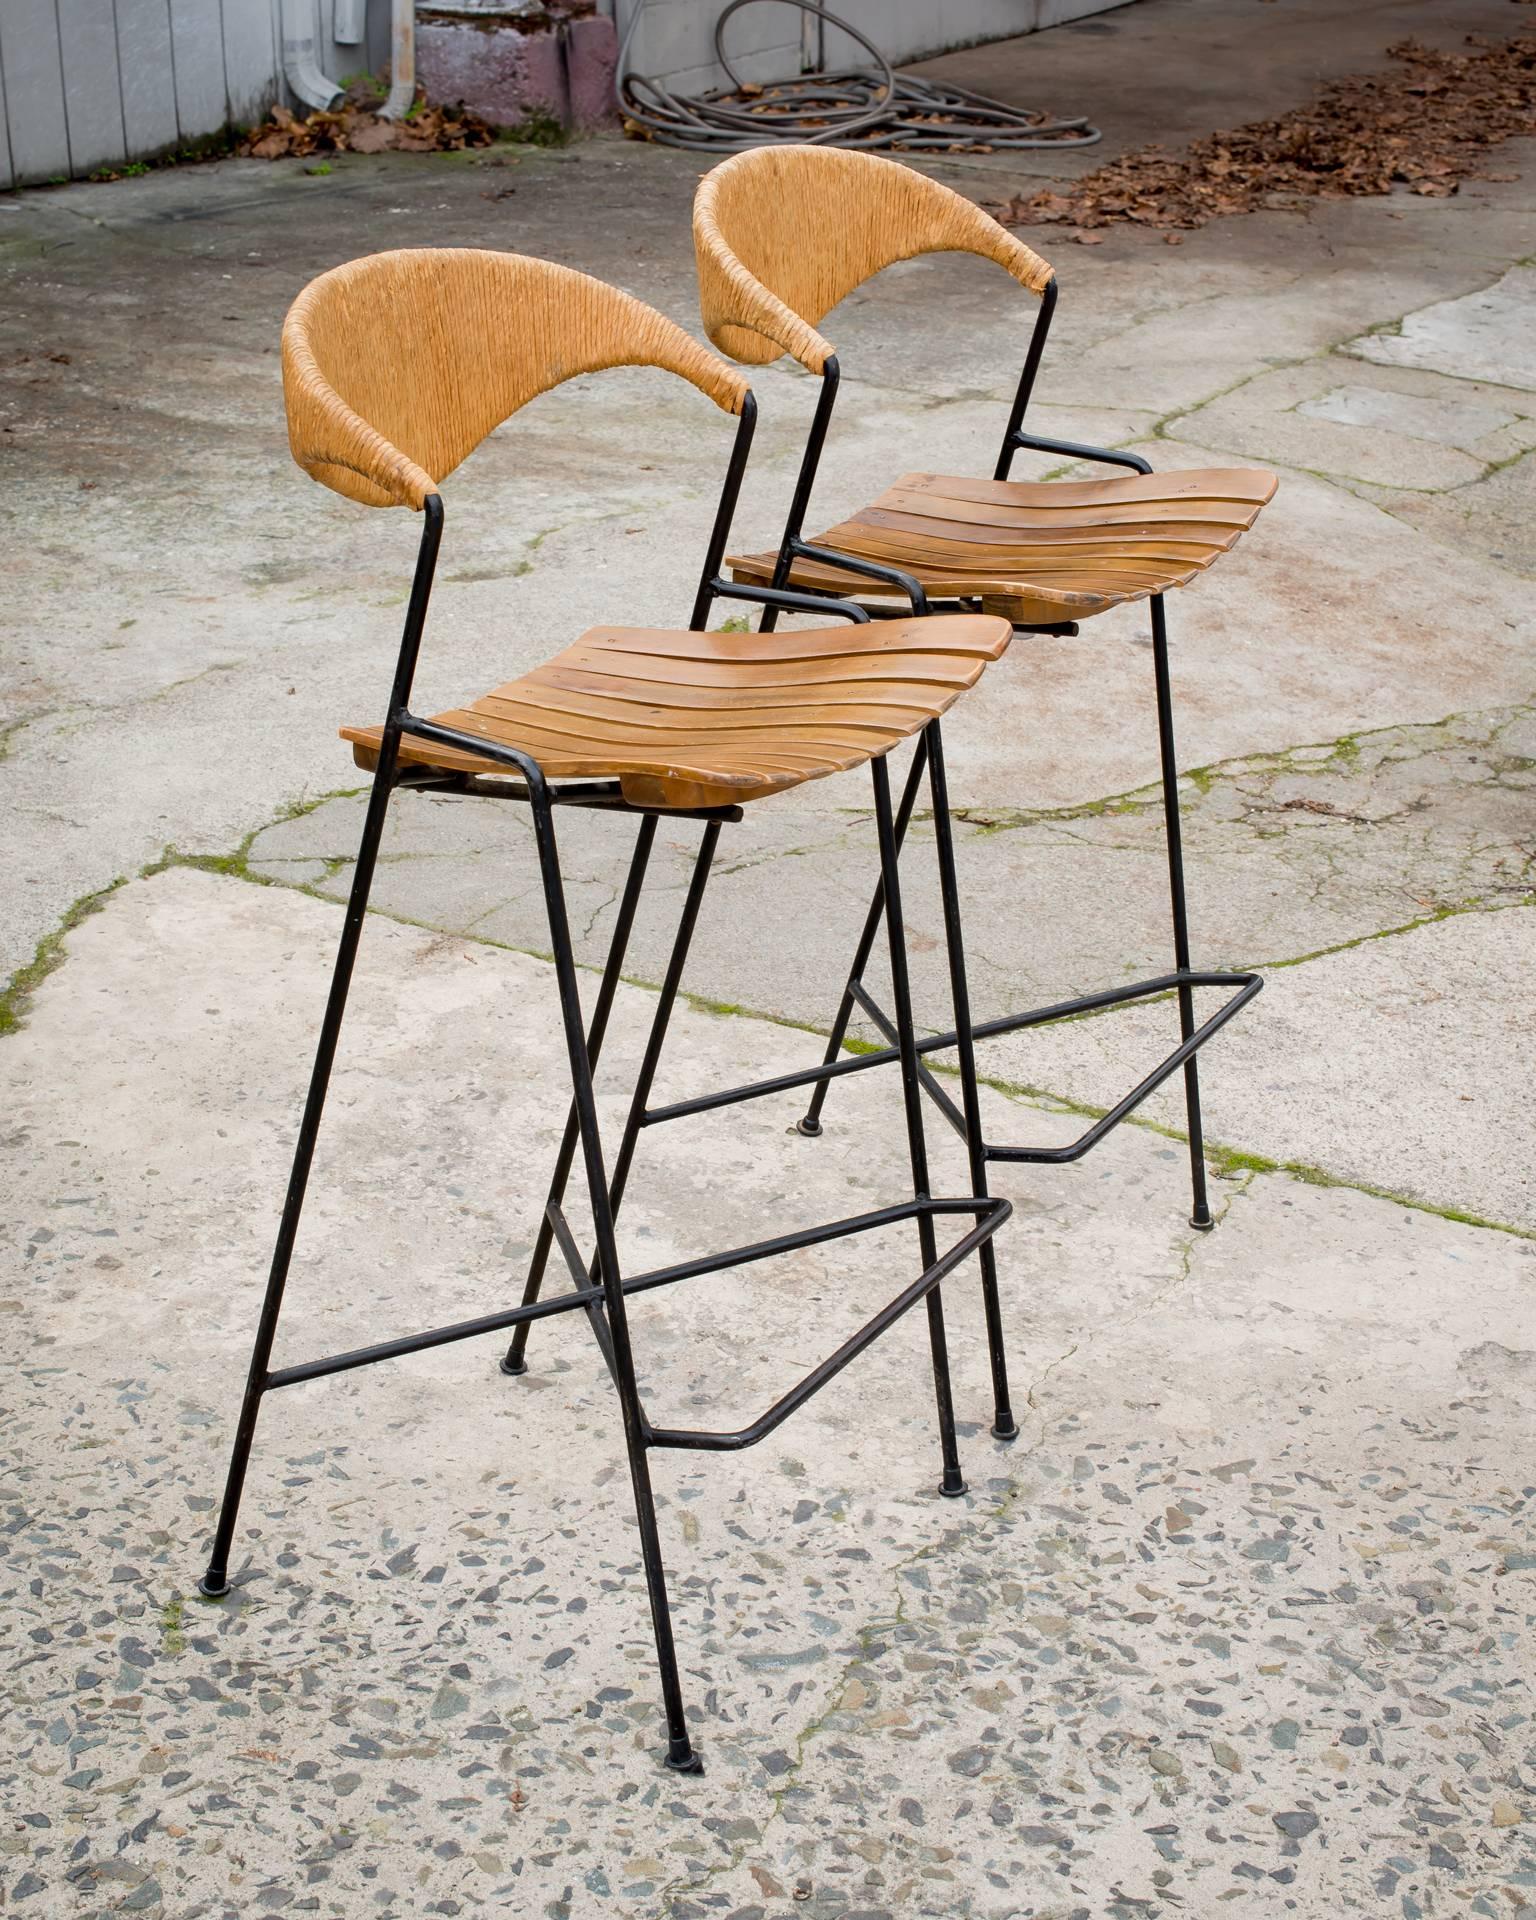 Iconic Pacifica Stools built with Umanoff’s signature materials. 
Pair of all-original Mid-century Umanoff Barstools in exceptional condition. 
Distributed by Raymor. Curved wood seat, seagrass wrapped free-form backs and super-sturdy rod-iron